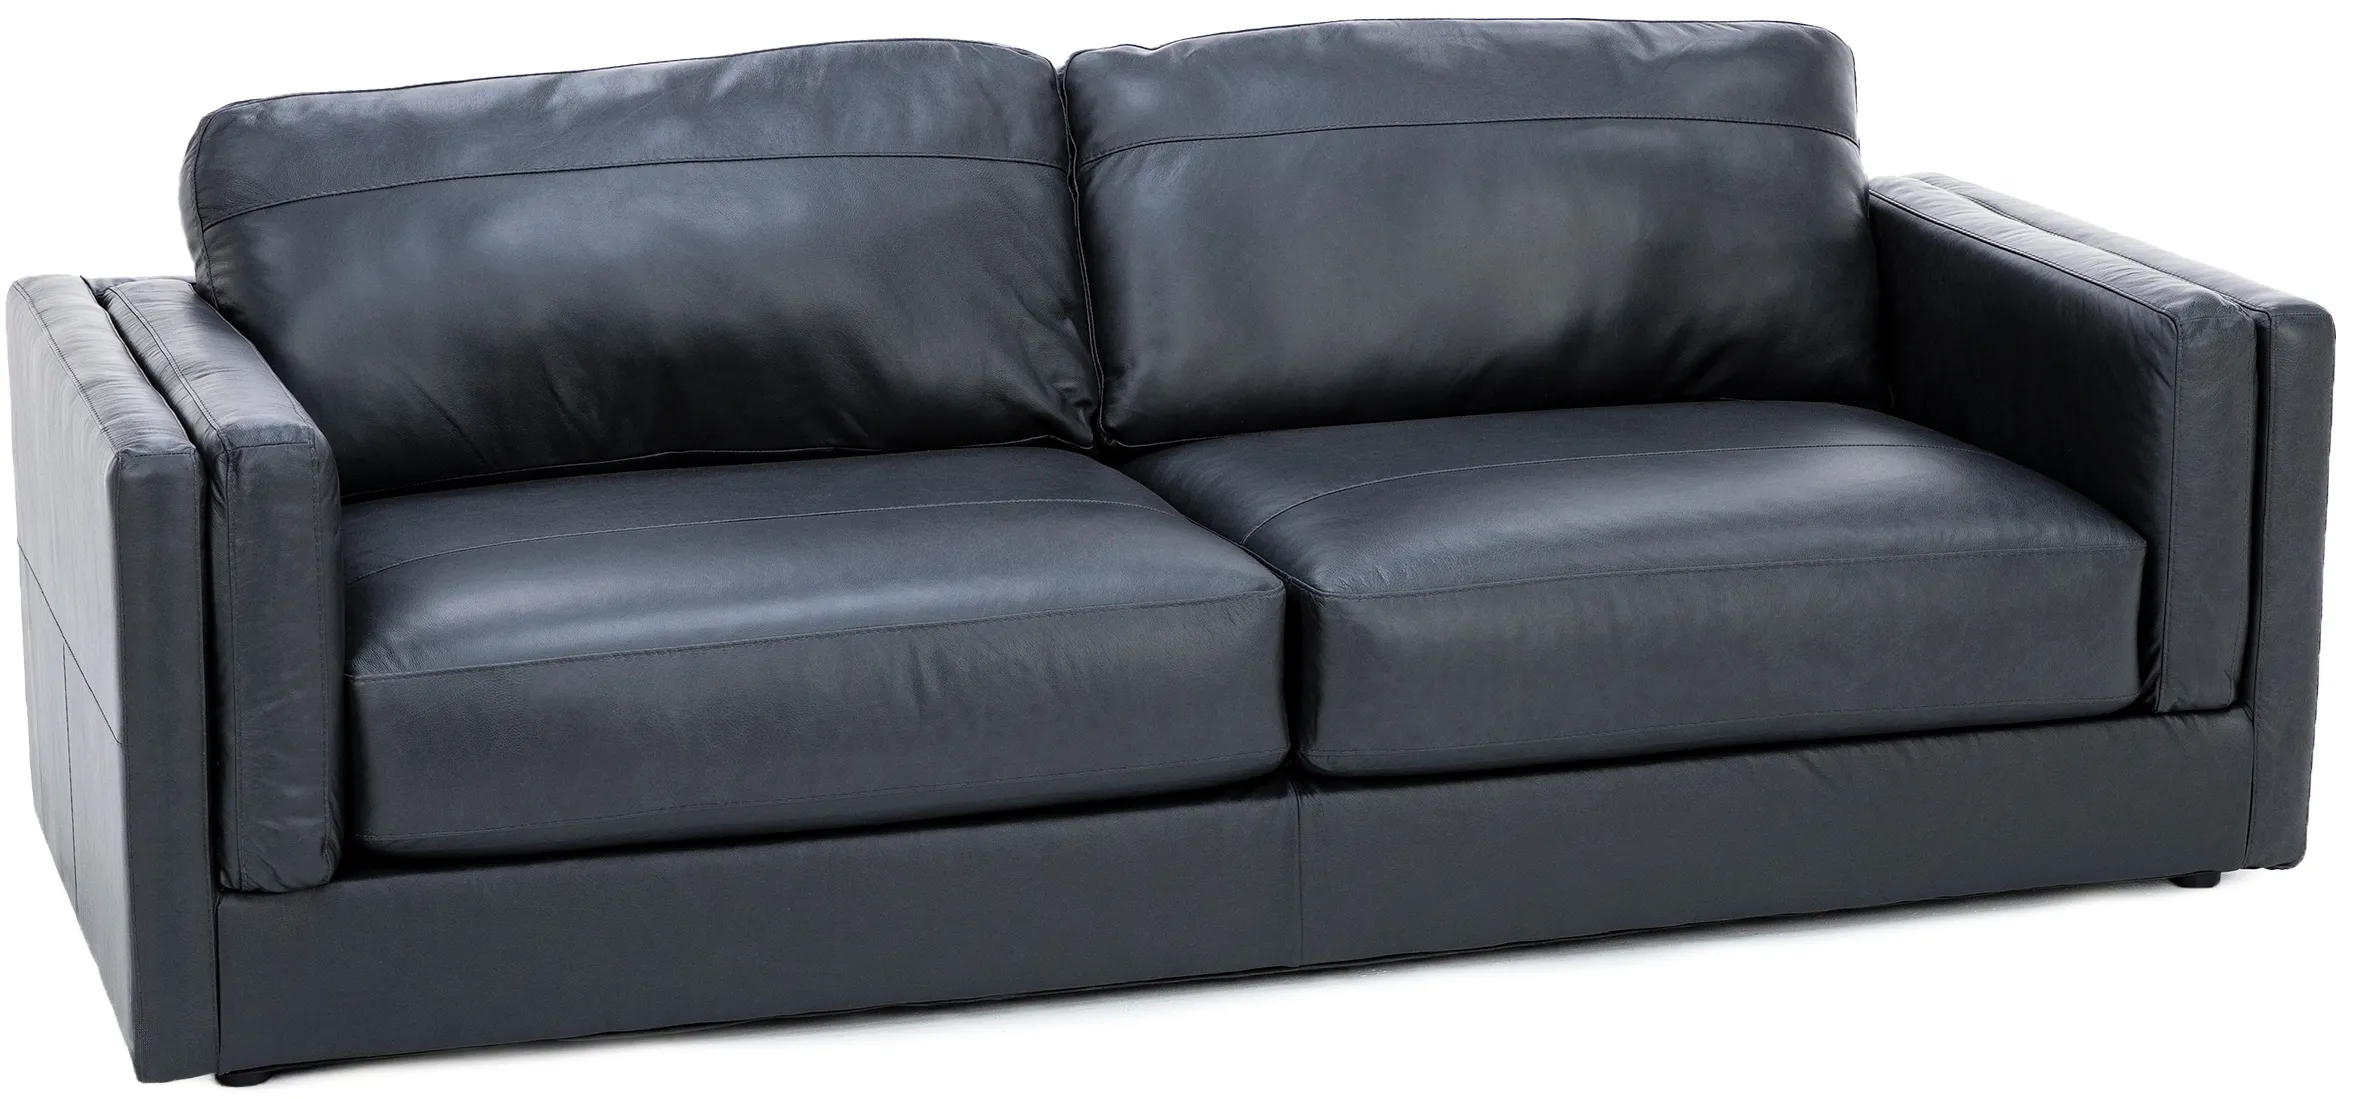 Starling Leather Sofa